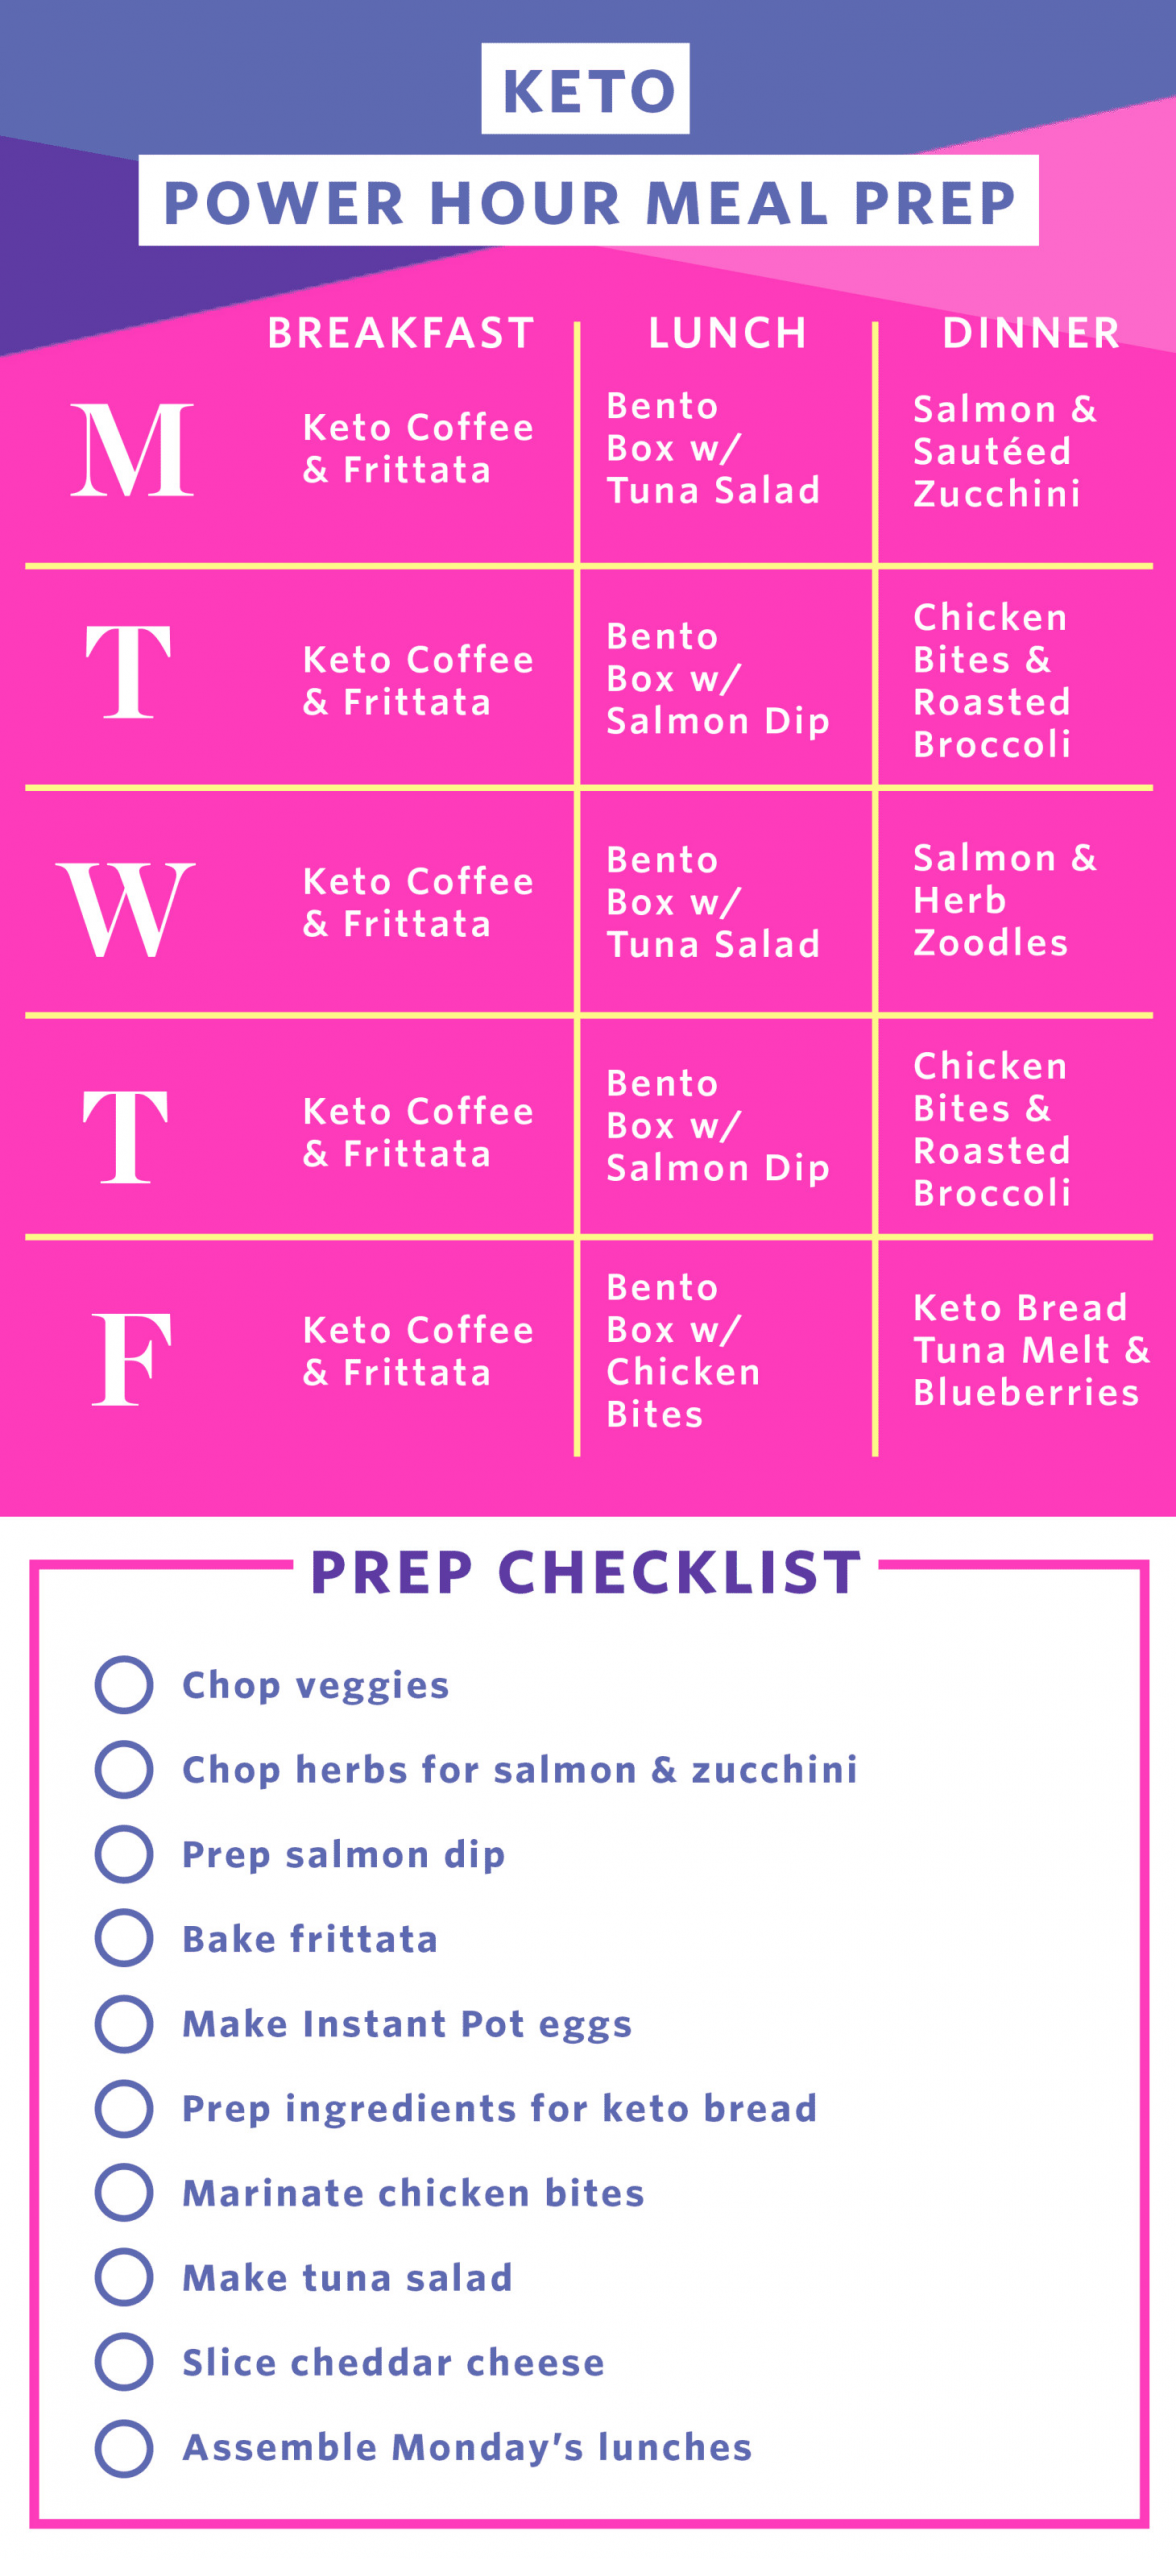 Keto Diet For Beginners Meal Plan Easy With Grocery List
 Fast Keto Meal Prep in Under 2 Hours